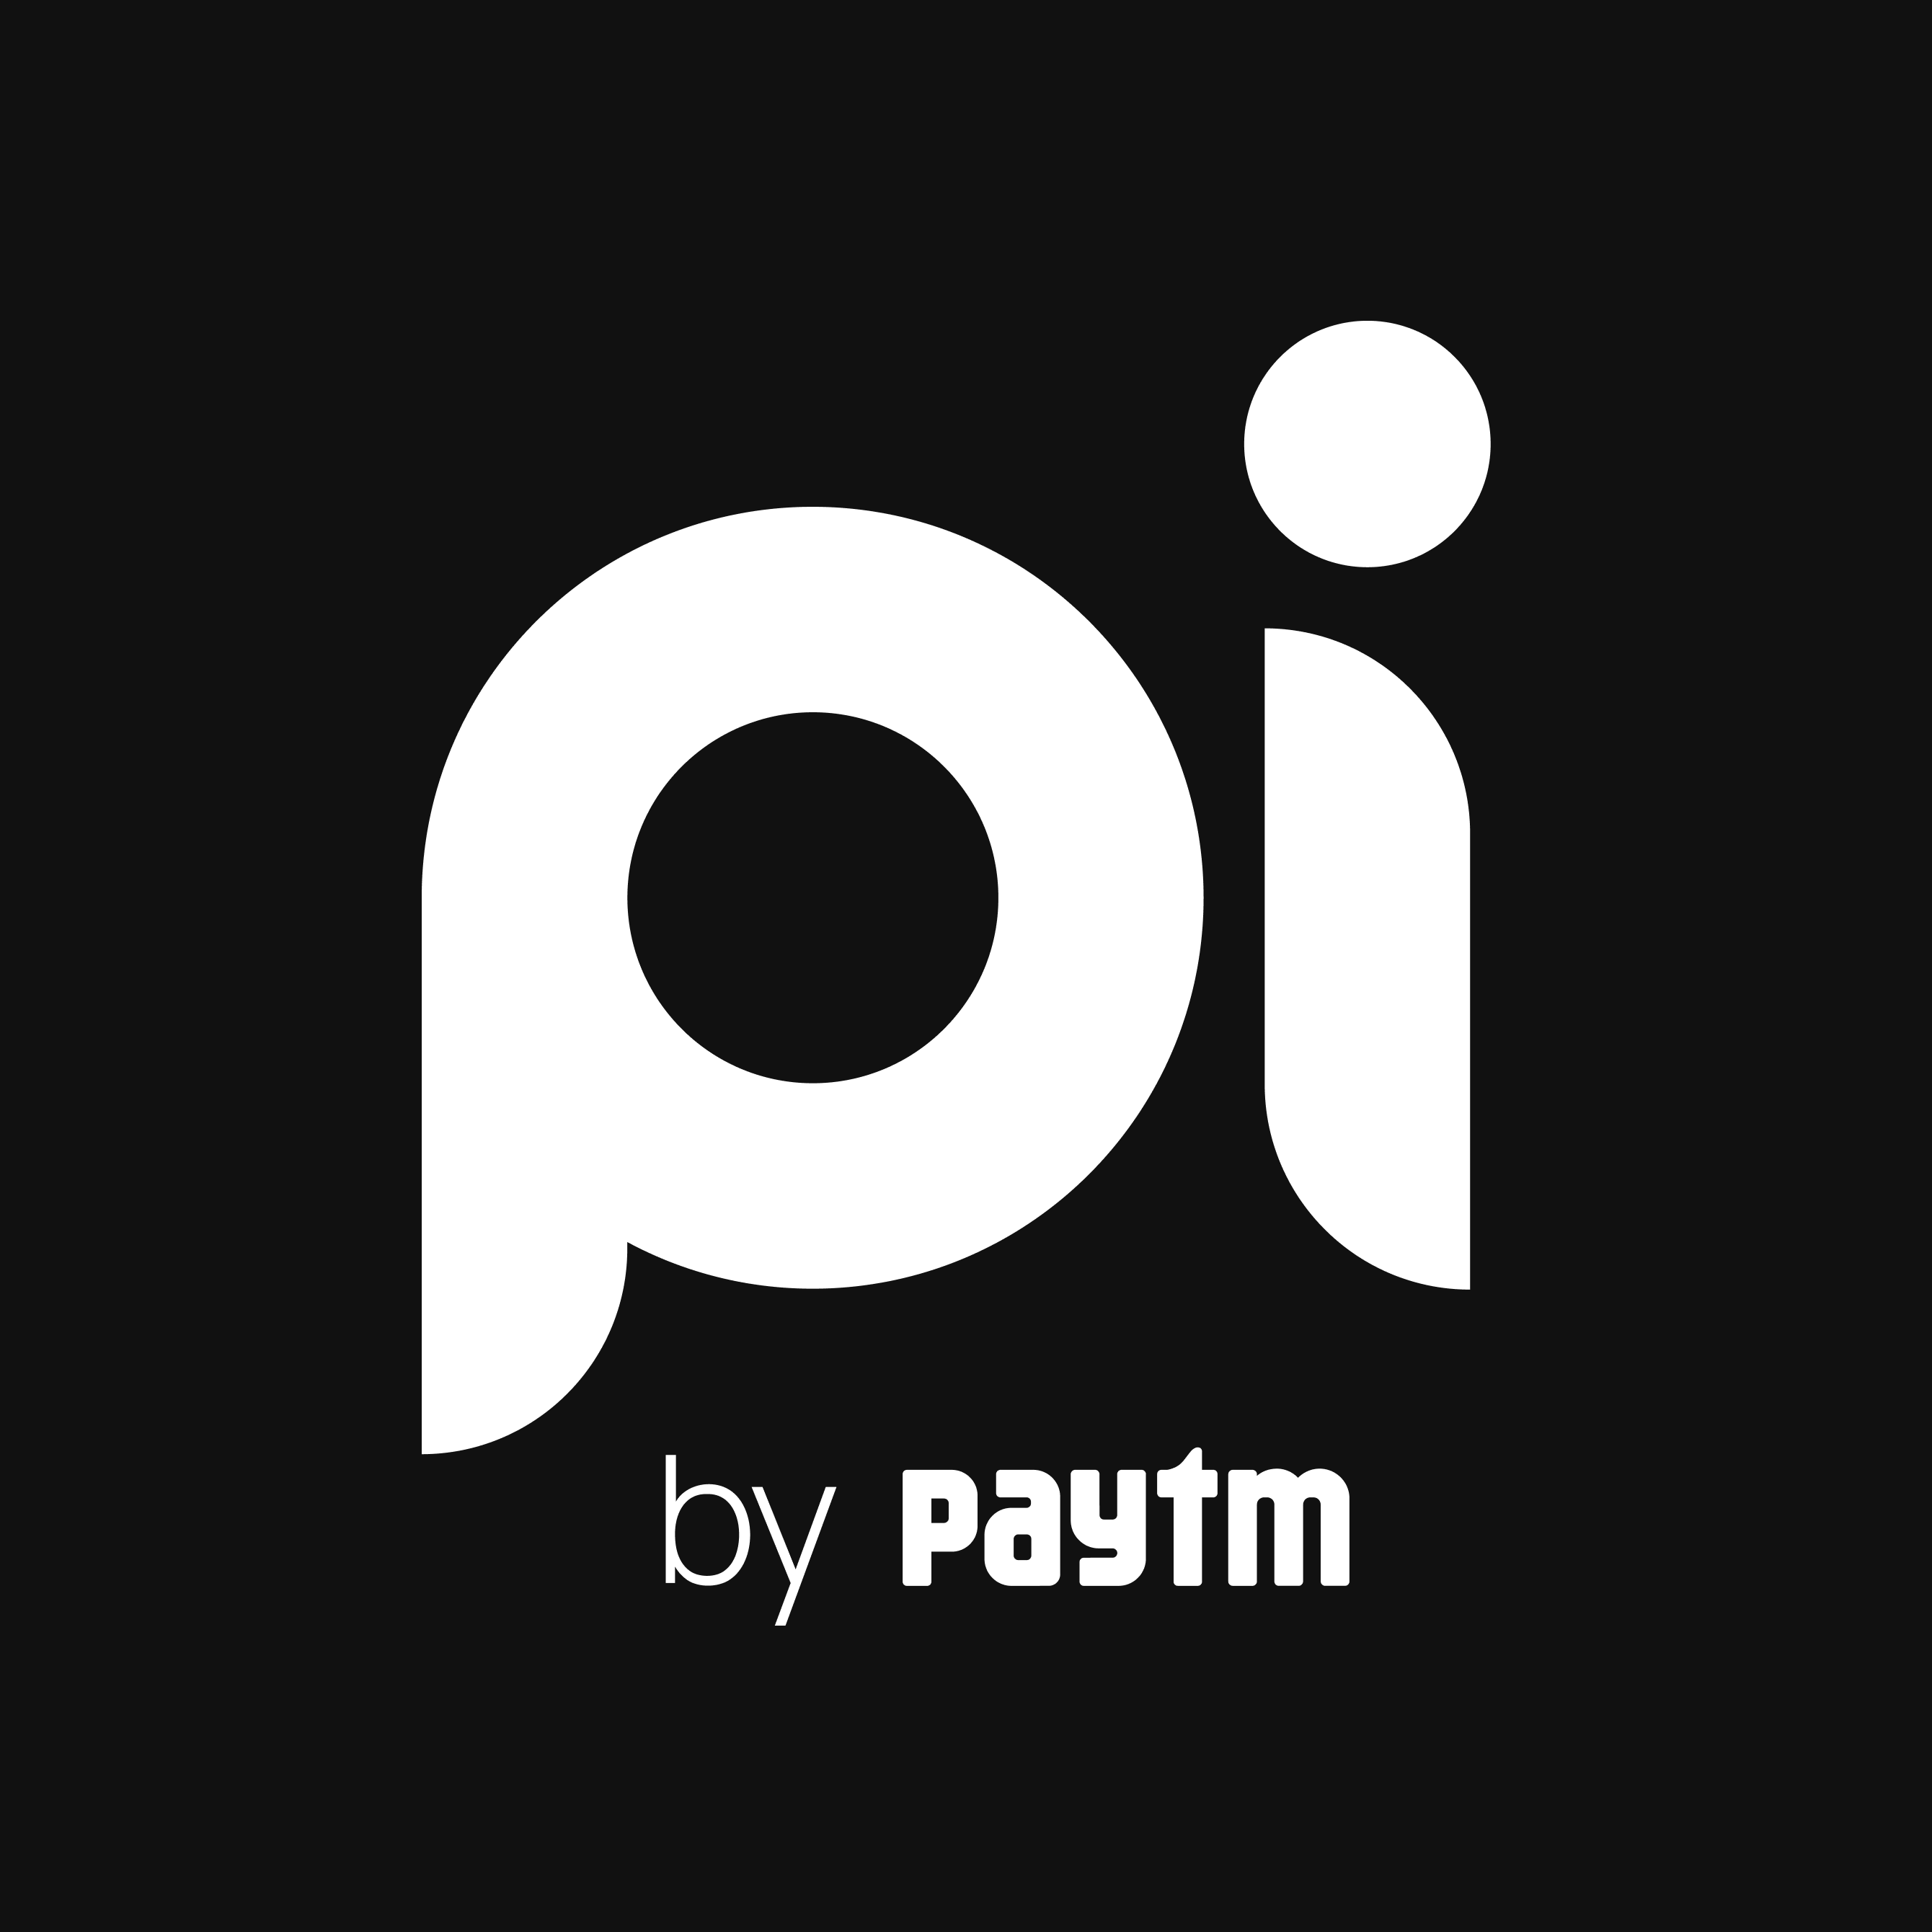 Pi by Paytm - Online Fraud and Risk Management Software